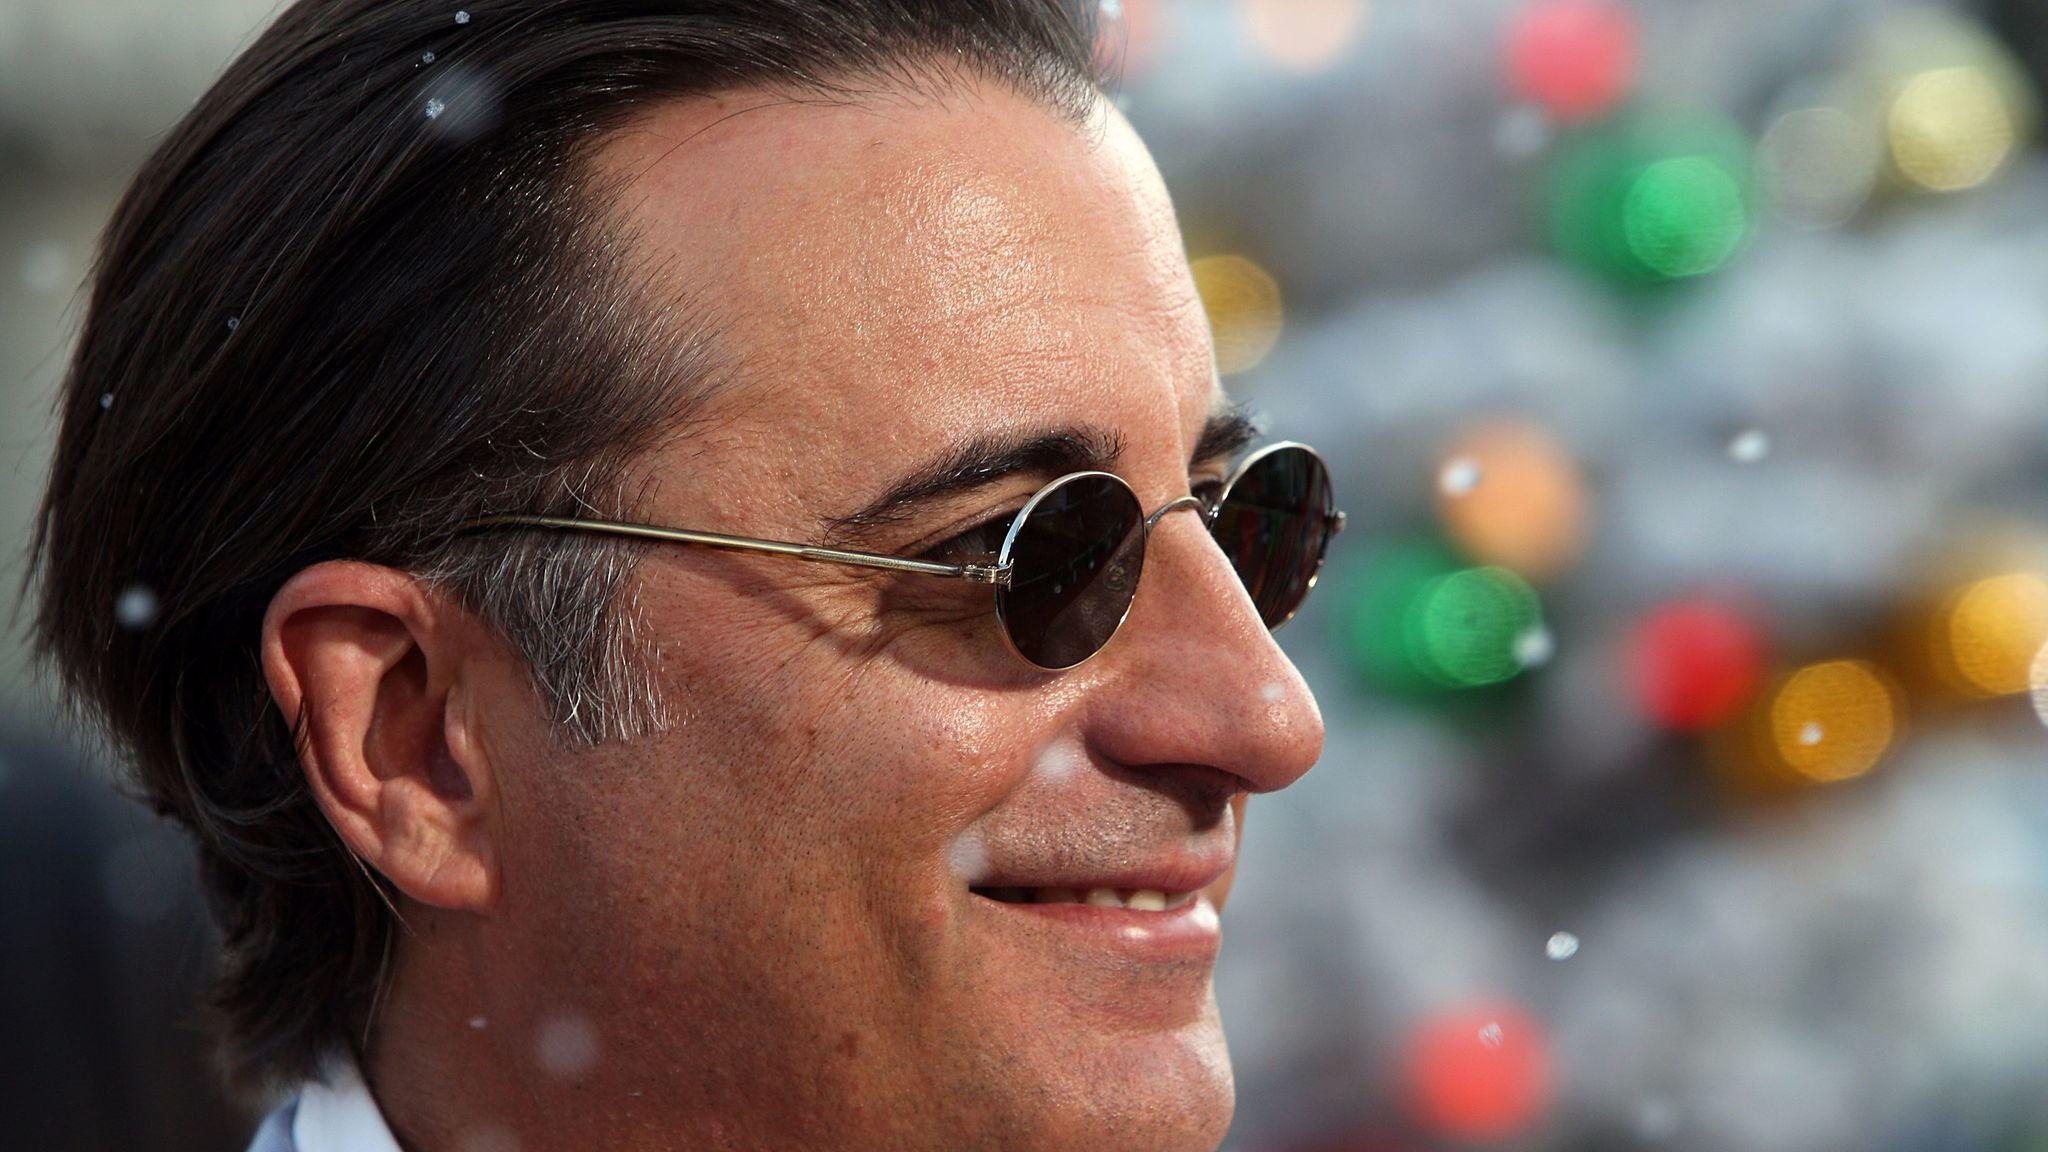 Miami's Andy Garcia cast in 'Book Club' movie about 'Fifty Shades